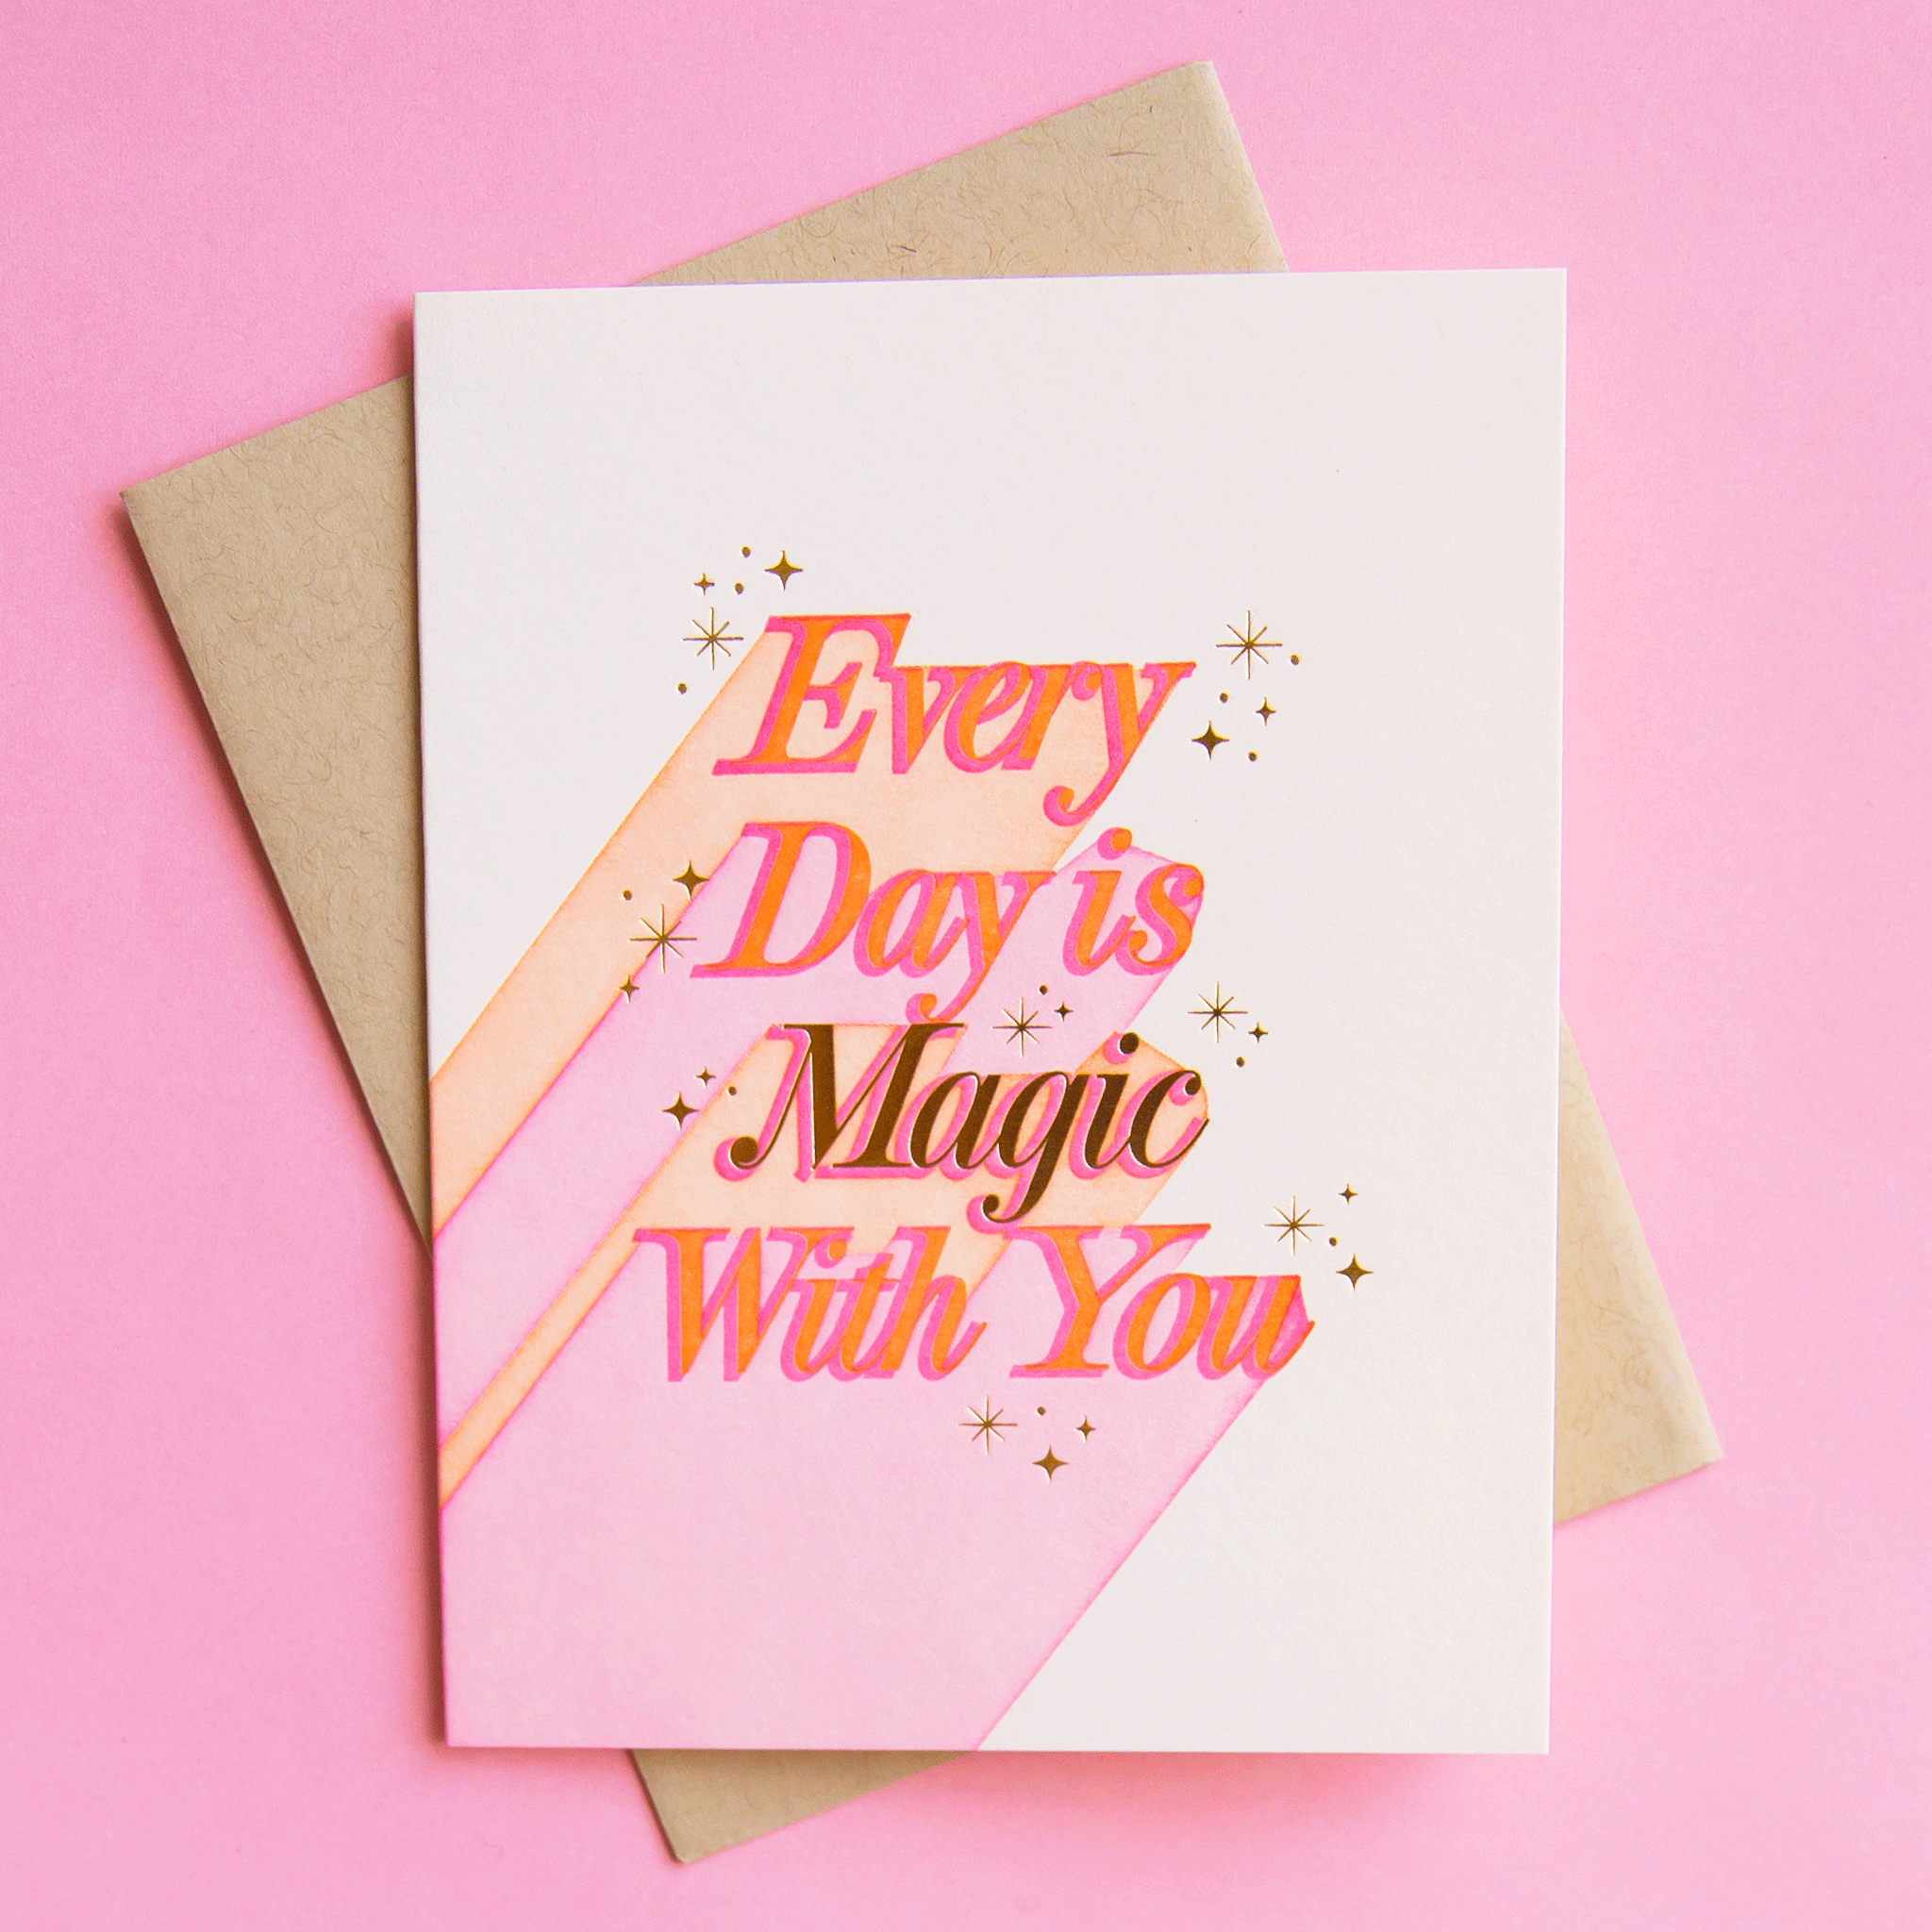 On a pink background is a white card with pink text that reads, "Every Day is Magic With You".